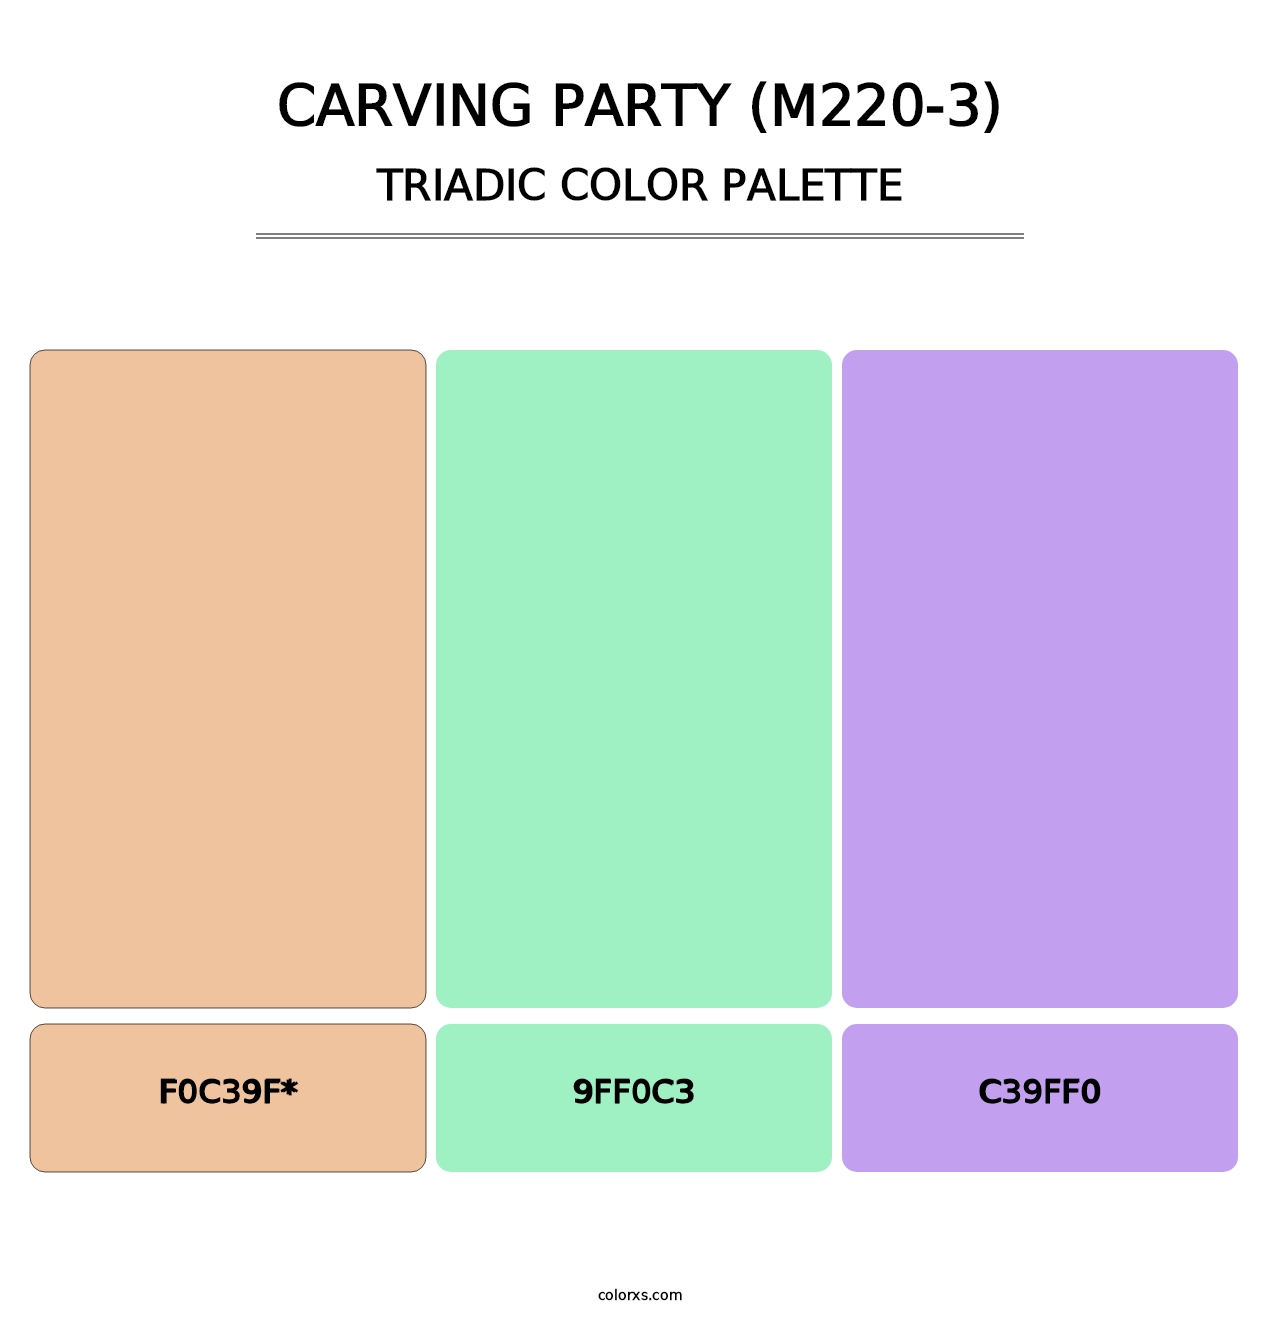 Carving Party (M220-3) - Triadic Color Palette